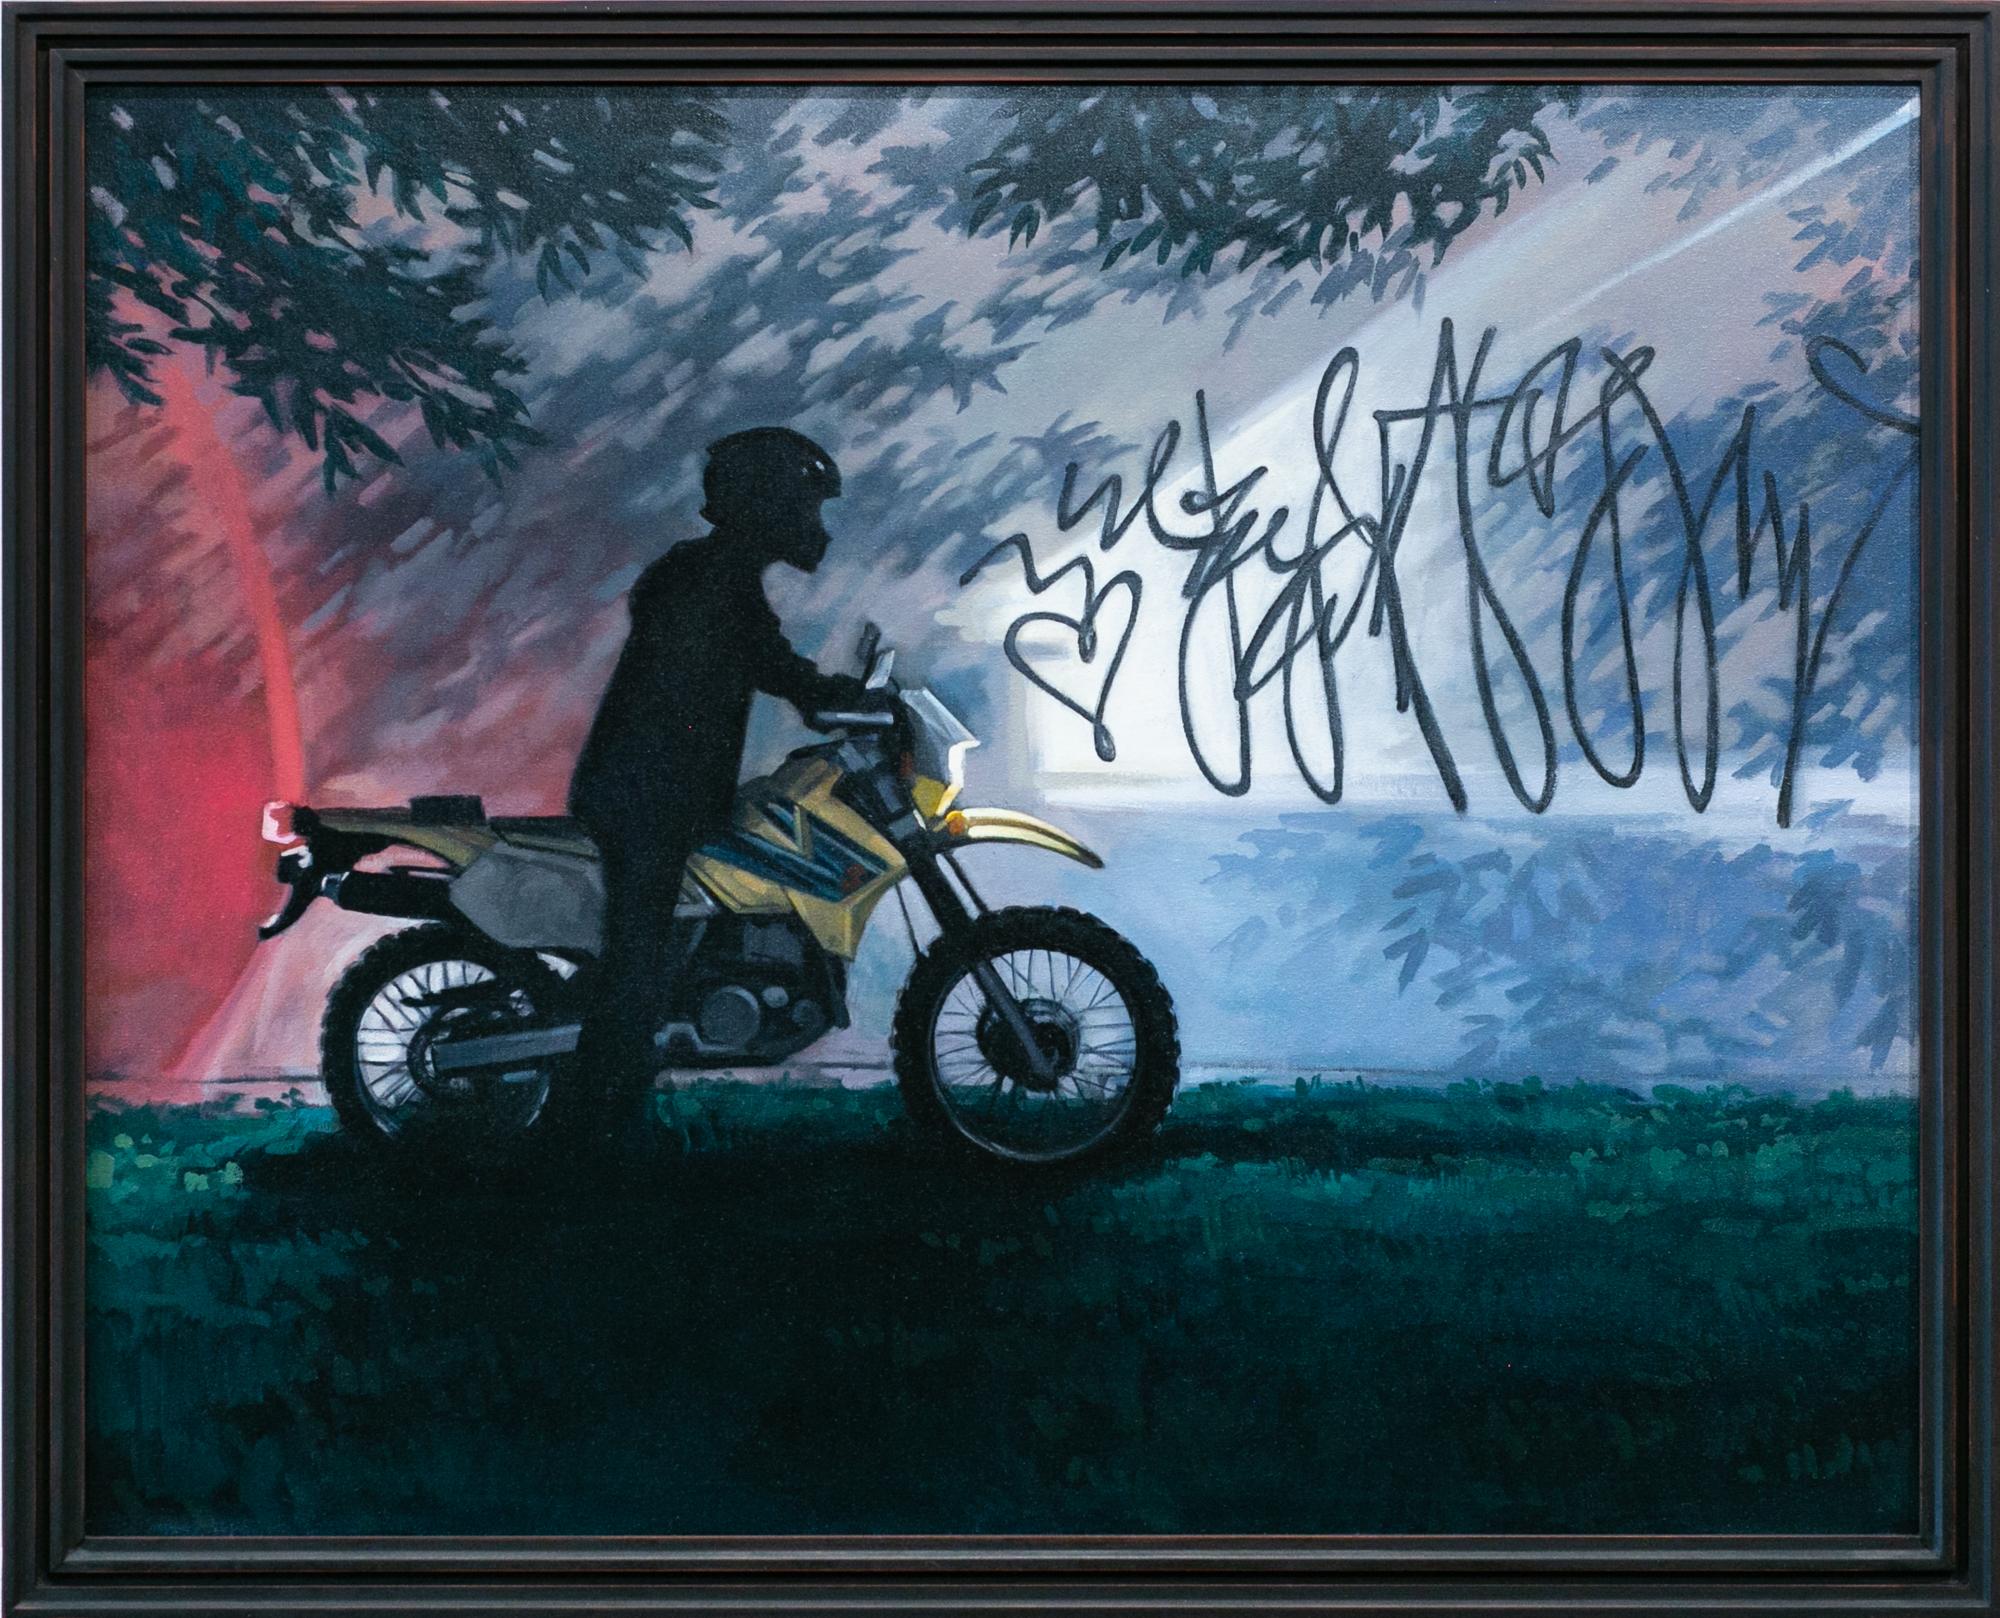 Katherine Fraser Landscape Painting - "Time Machine", Motorcycle and Graffiti Figurative Oil Painting